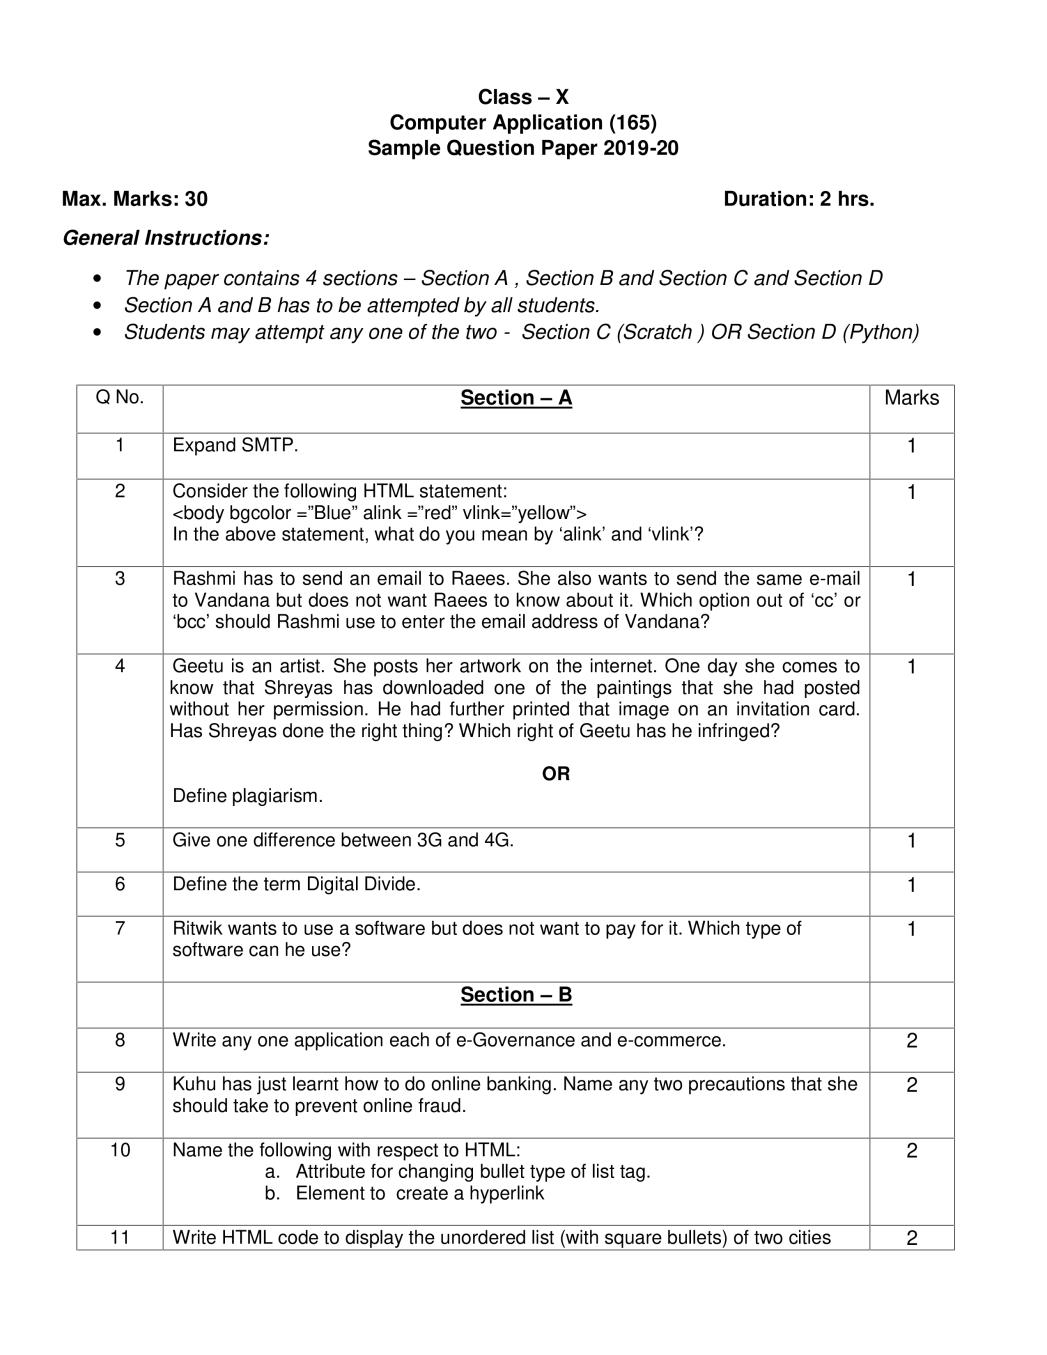 Cbse Class 10 Sample Paper 2020 For Computer Application